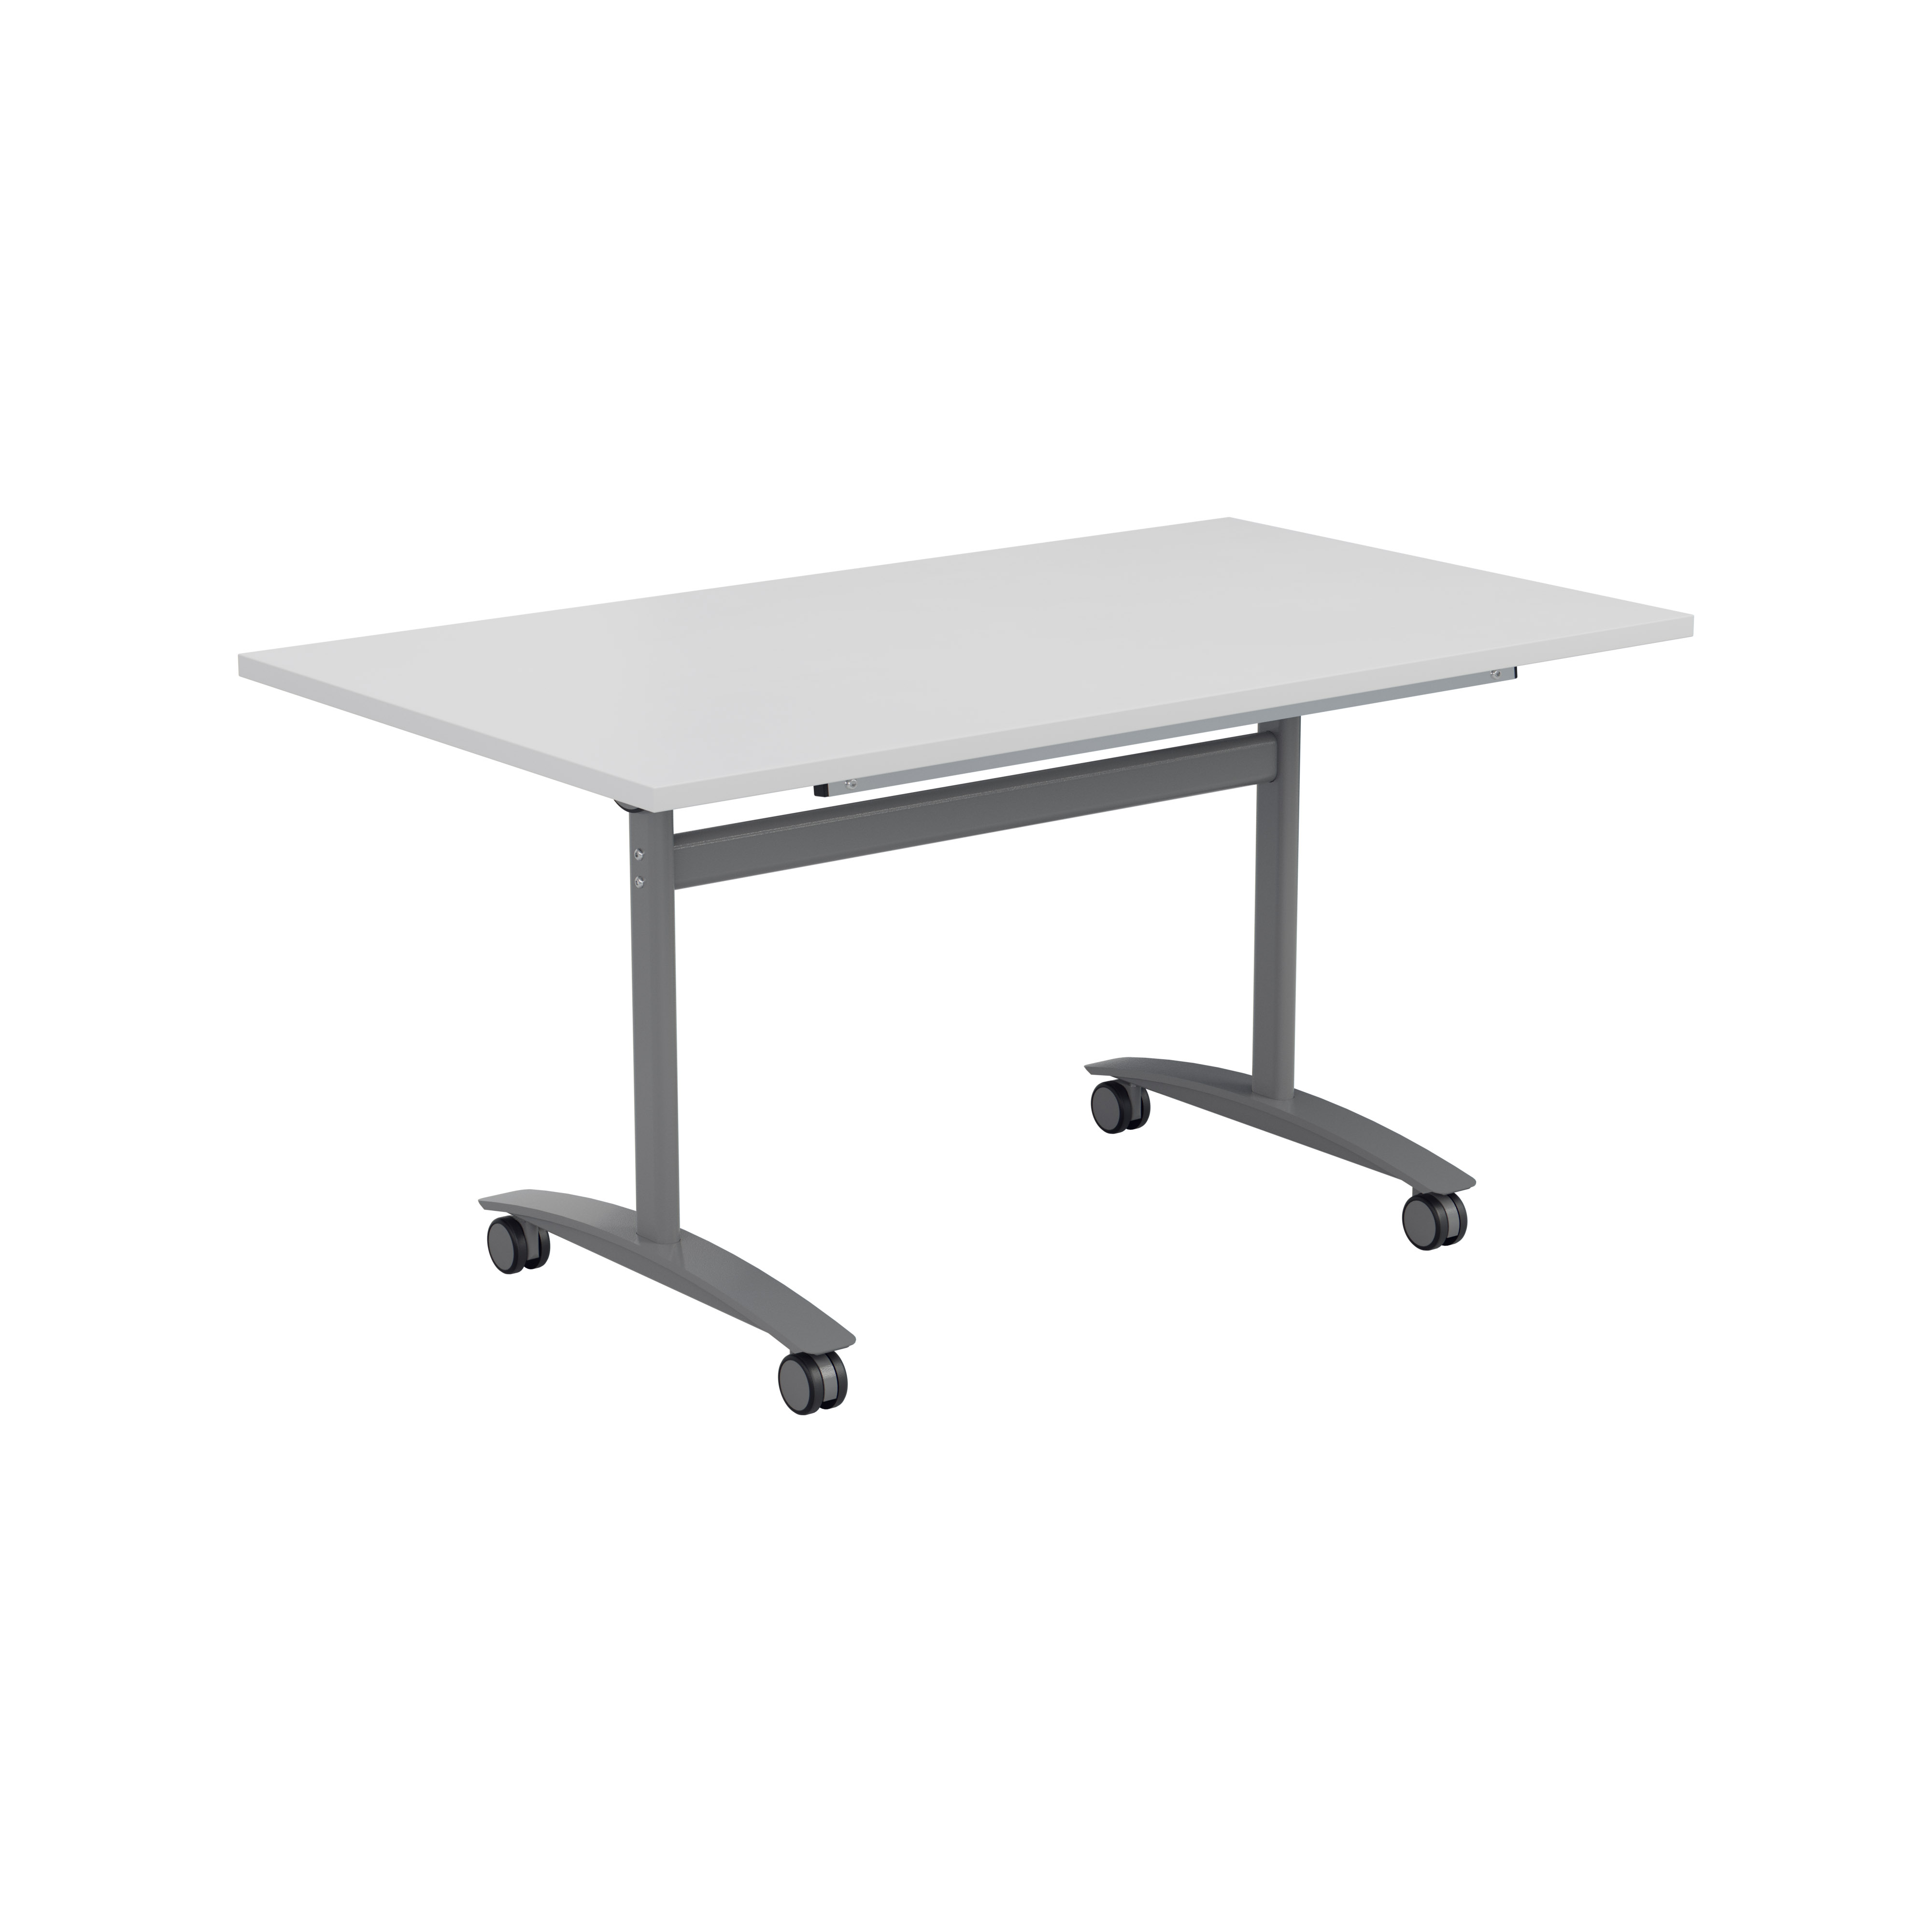 Tilting Table 1600 X 800 - White Top and Silver Legs